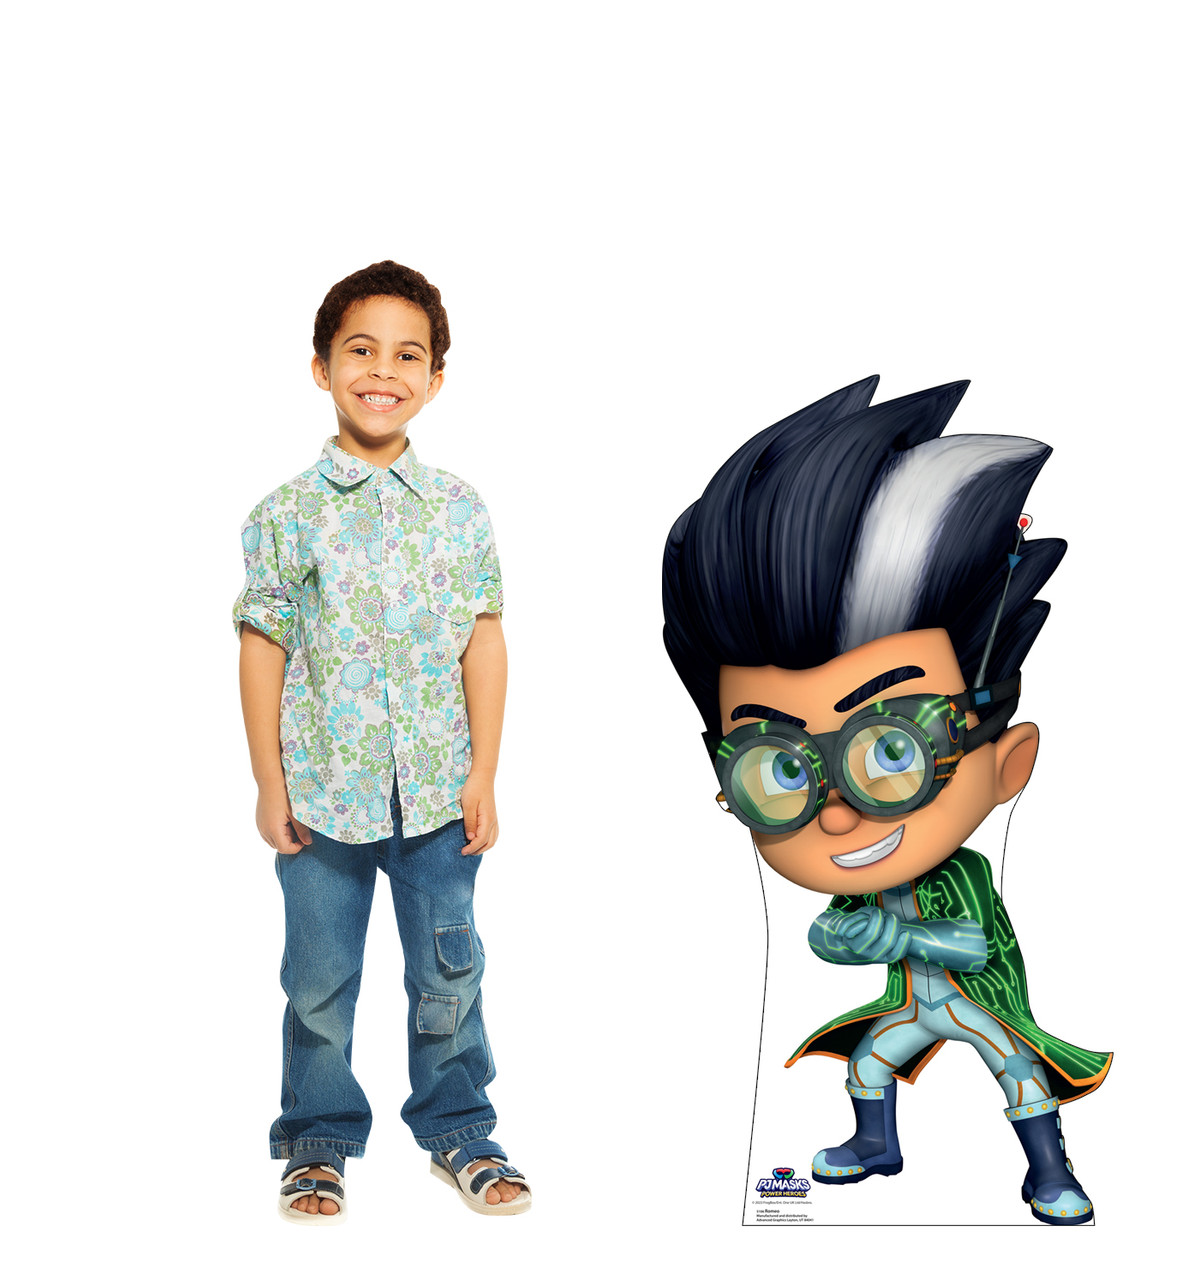 Life-size cardboard standee of Romeo from PJ Masks Power Heroes with model.